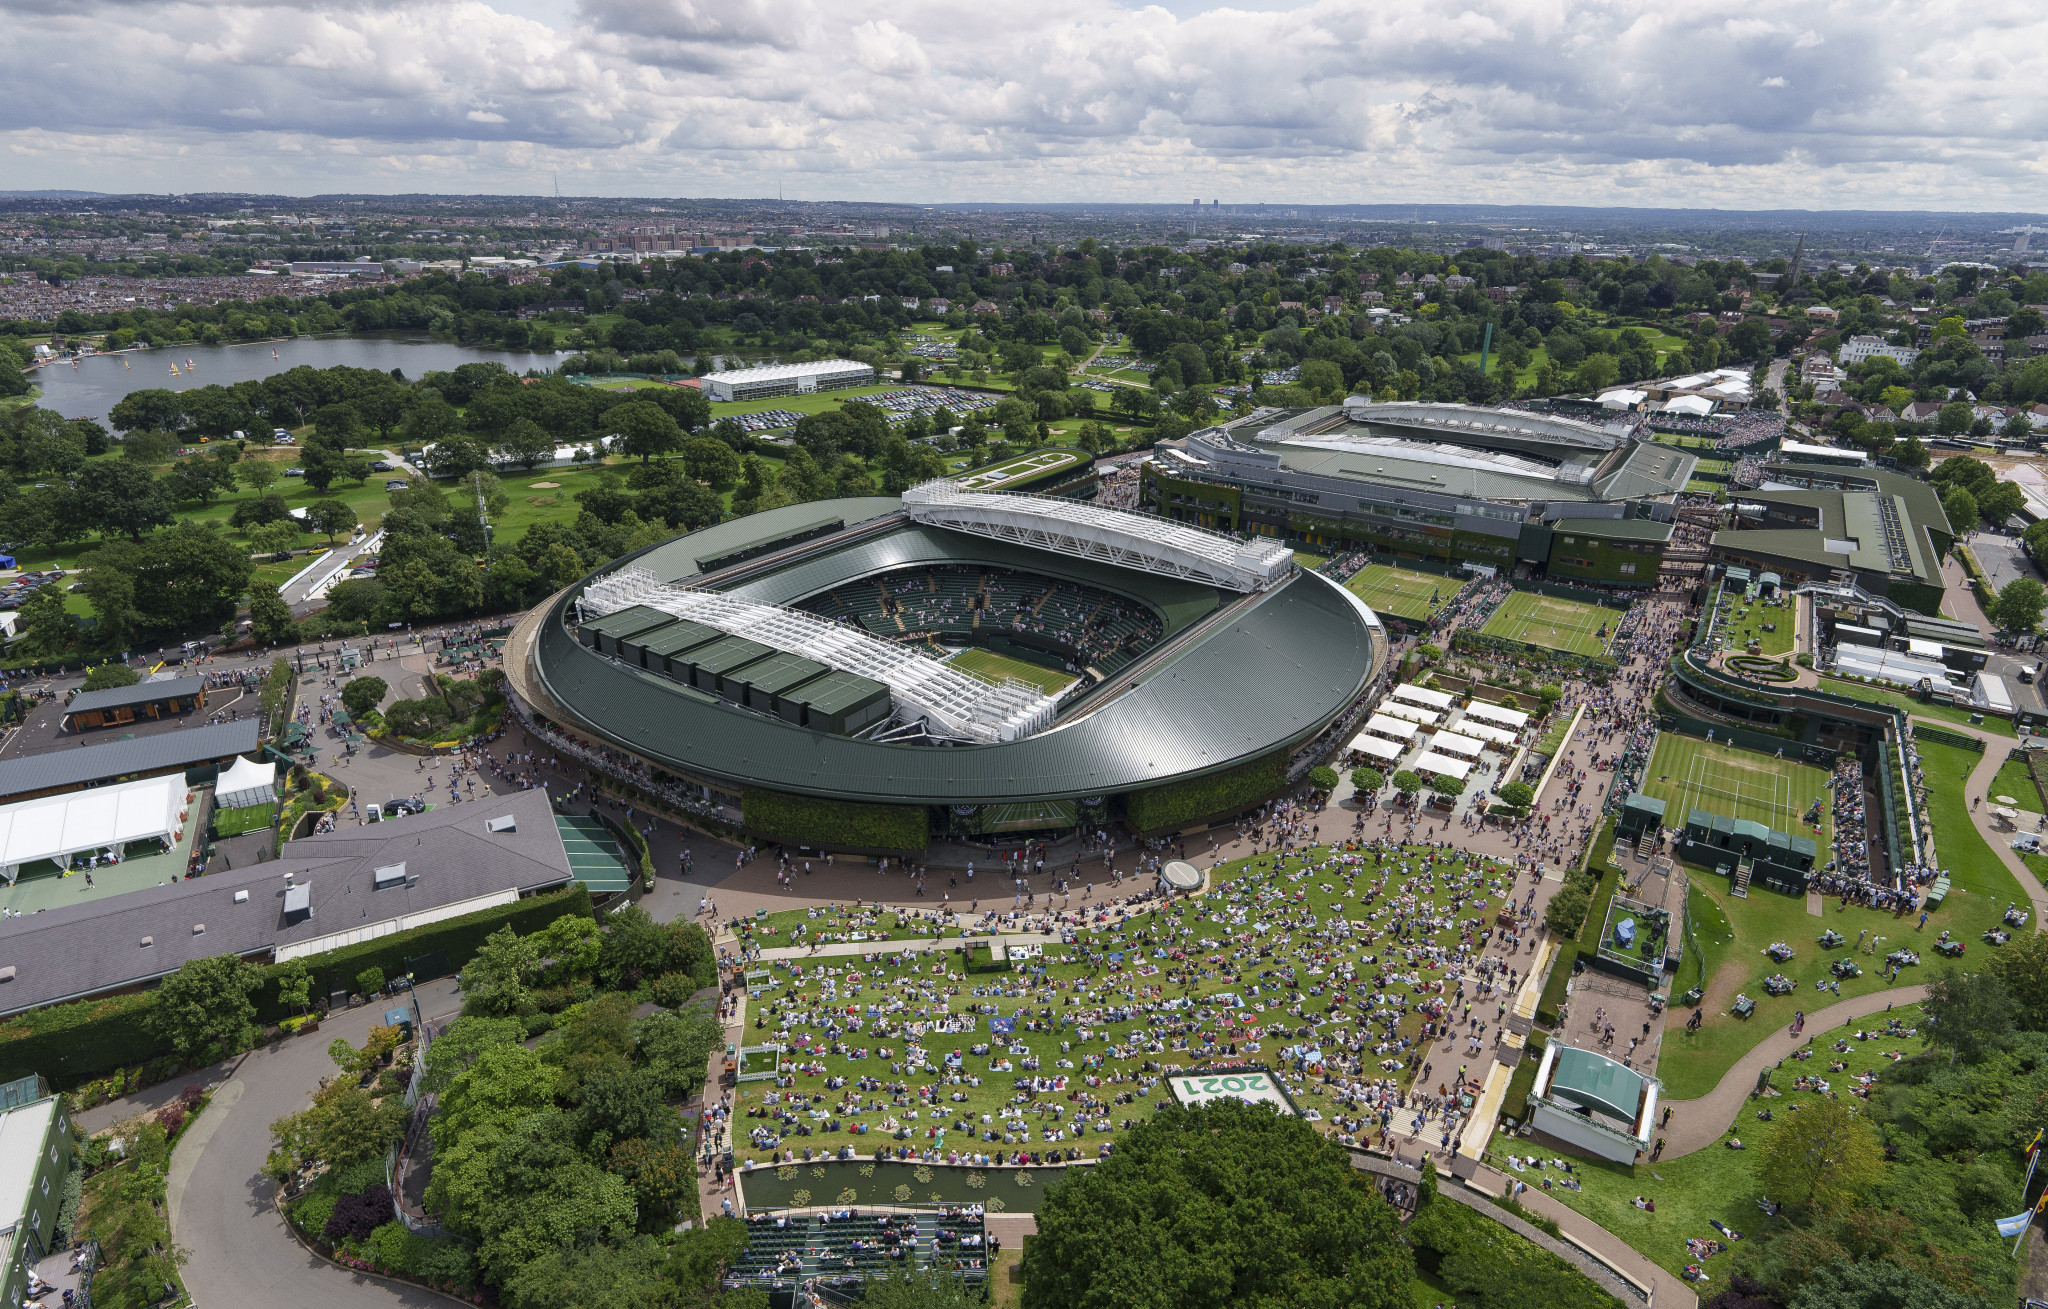 Russian and Belarusian players are reportedly set to be allowed to return to Wimbledon as neutrals this year ©Getty Images